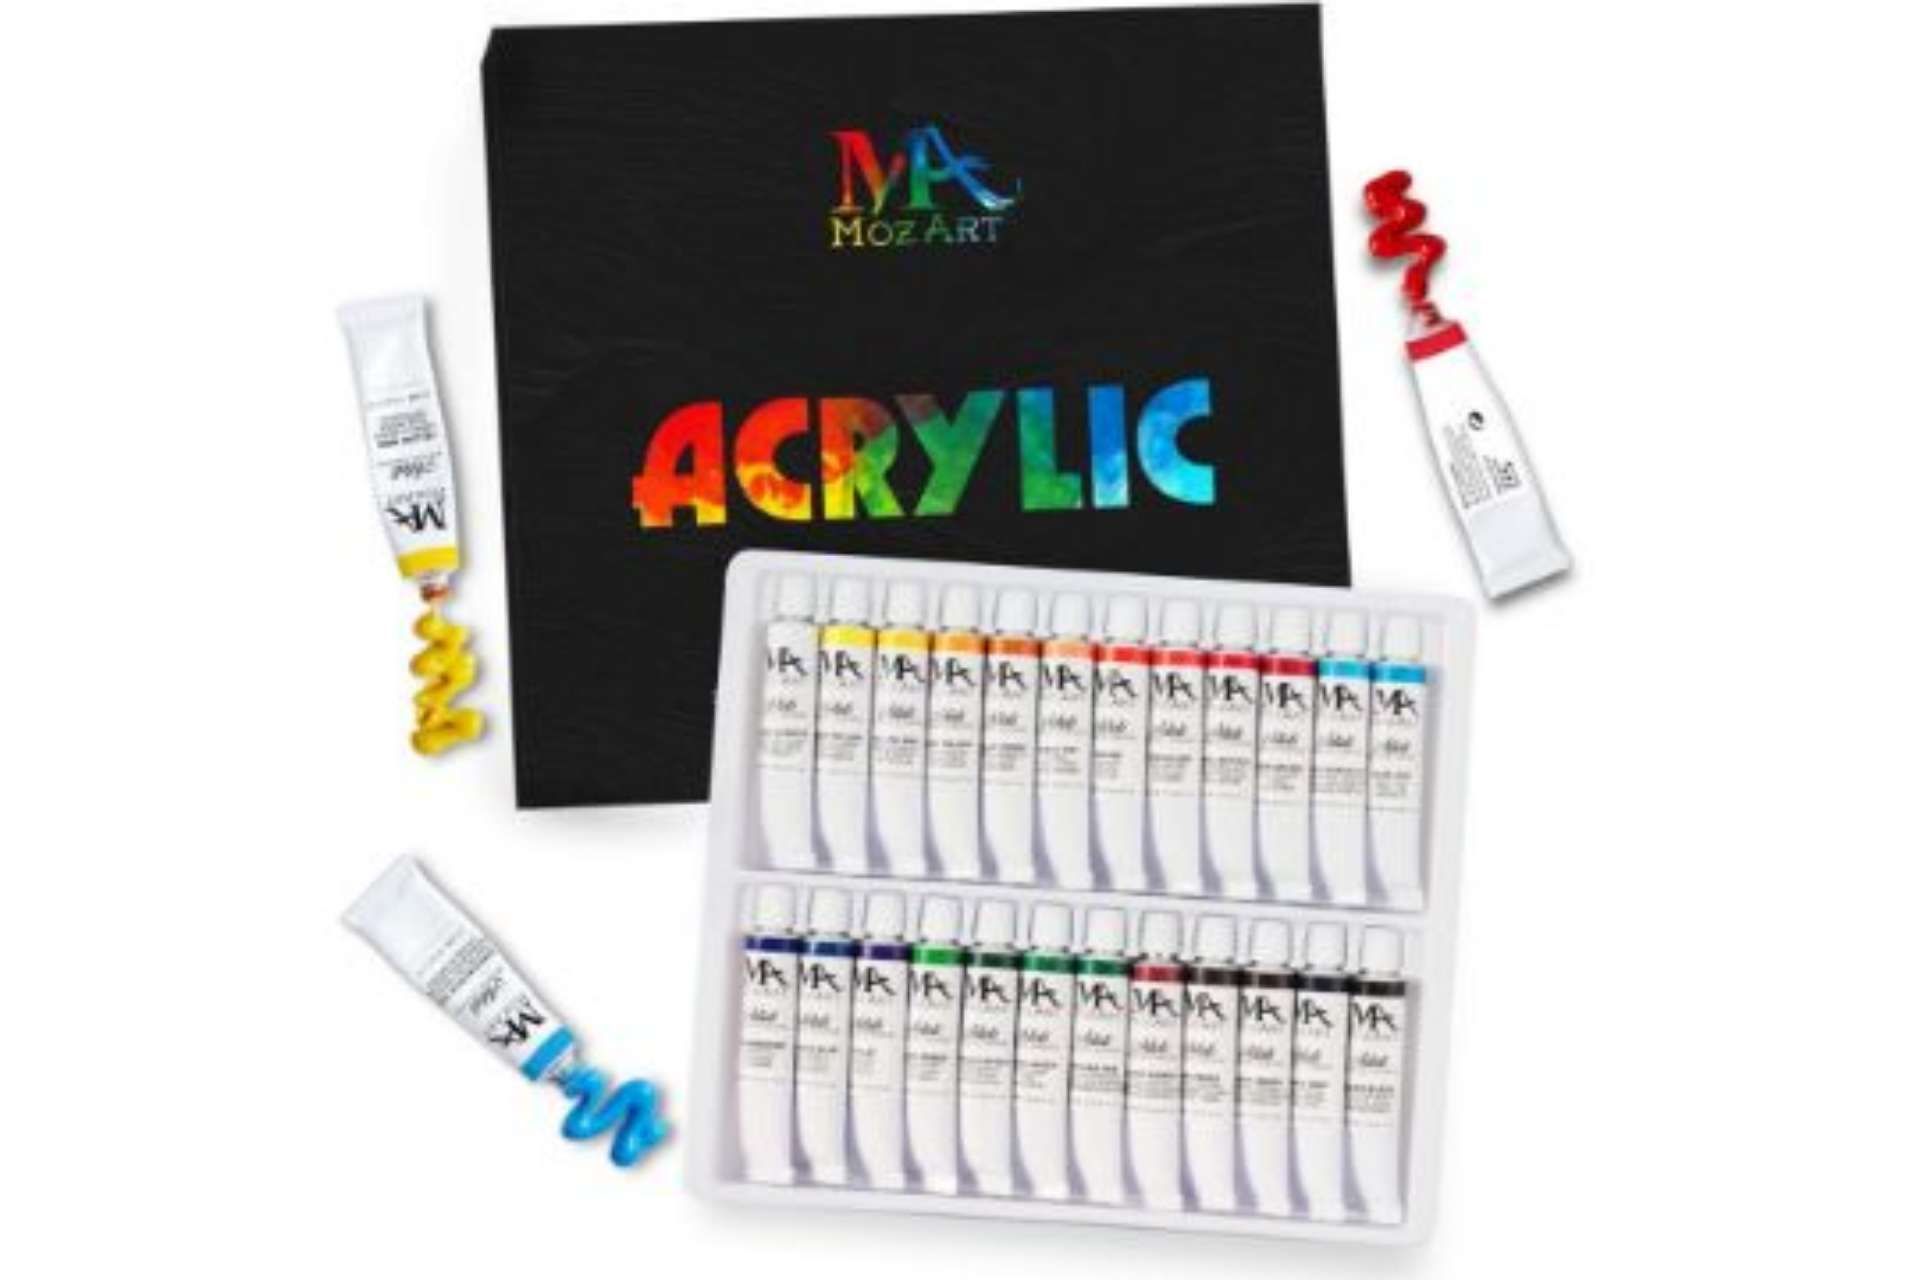 TRADE LOT 100 X BRAND NEW MOZART 24 COLOUR ACRYLIC ART PAINT SET FOR ARTISTS R1.10/2.4